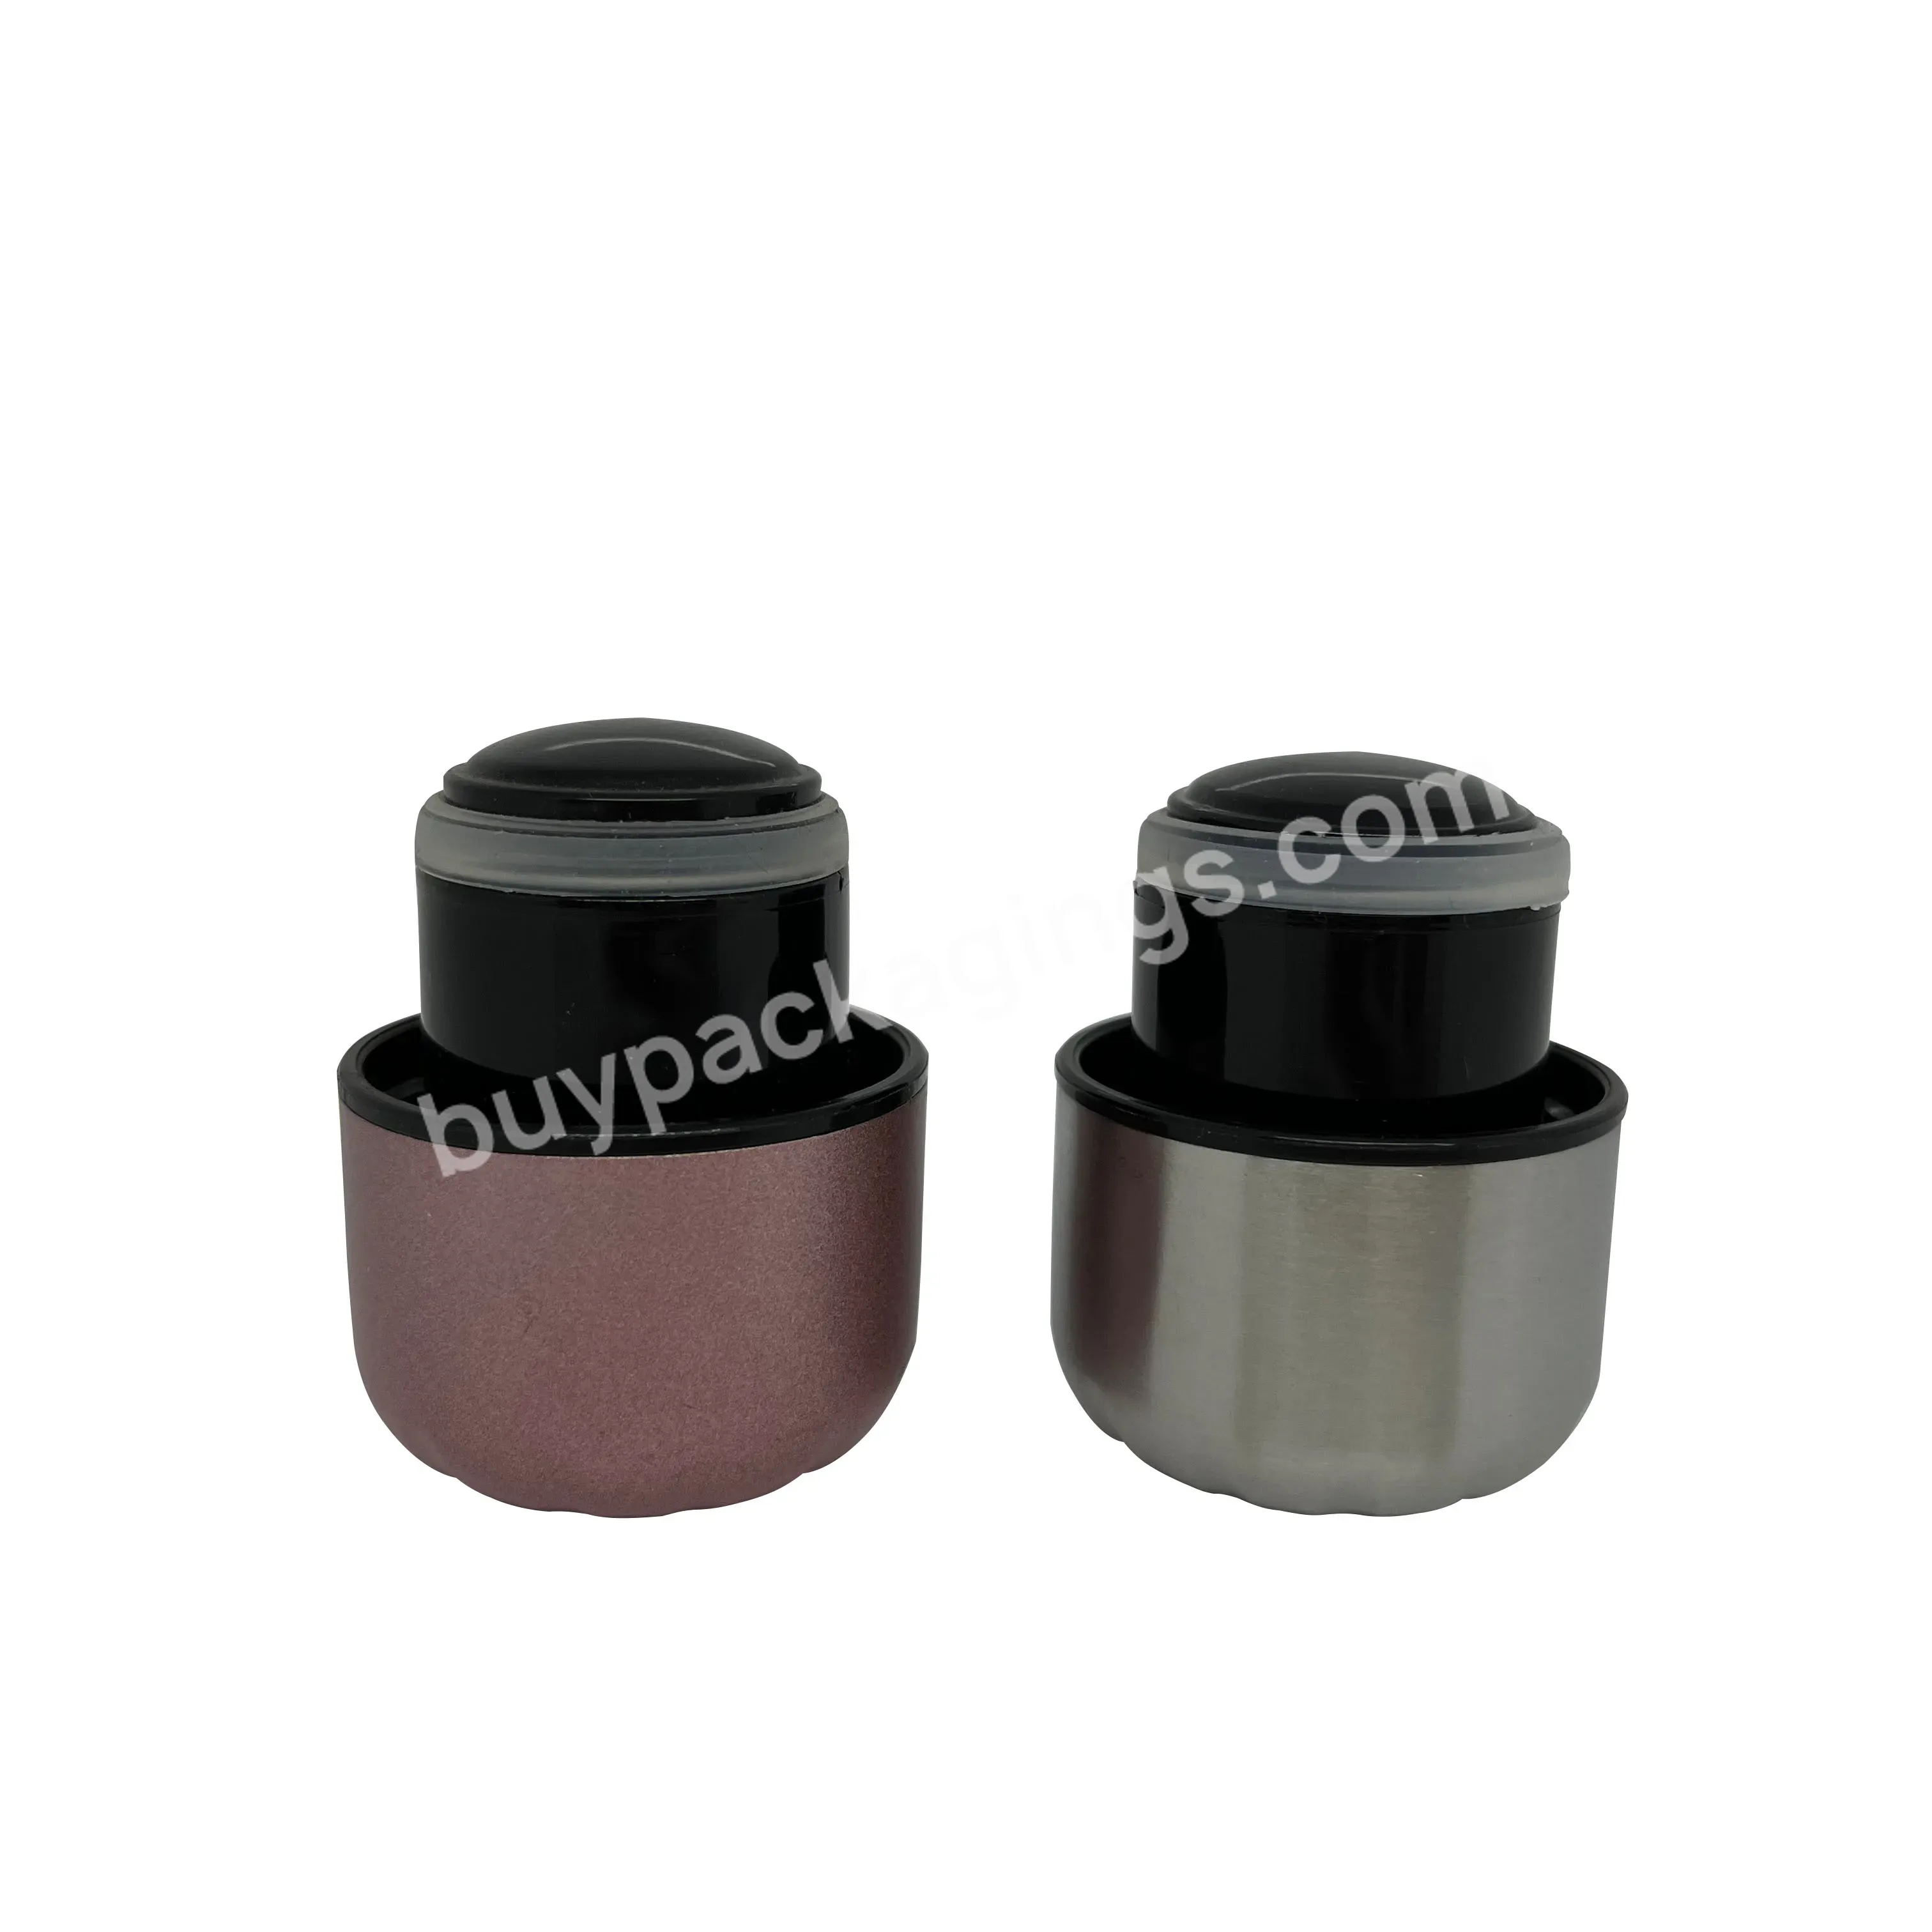 500ml 750ml Wholesale Stainless Steel Thermos Cup Steel Cap Thermos Cup General Accessories Bottle Cap With Silicone Ring - Buy 500ml 750ml Wholesale Stainless Steel Thermos Cup Steel Cap,Thermos Cup General Accessories,Bottle Cap With Silicone Ring.